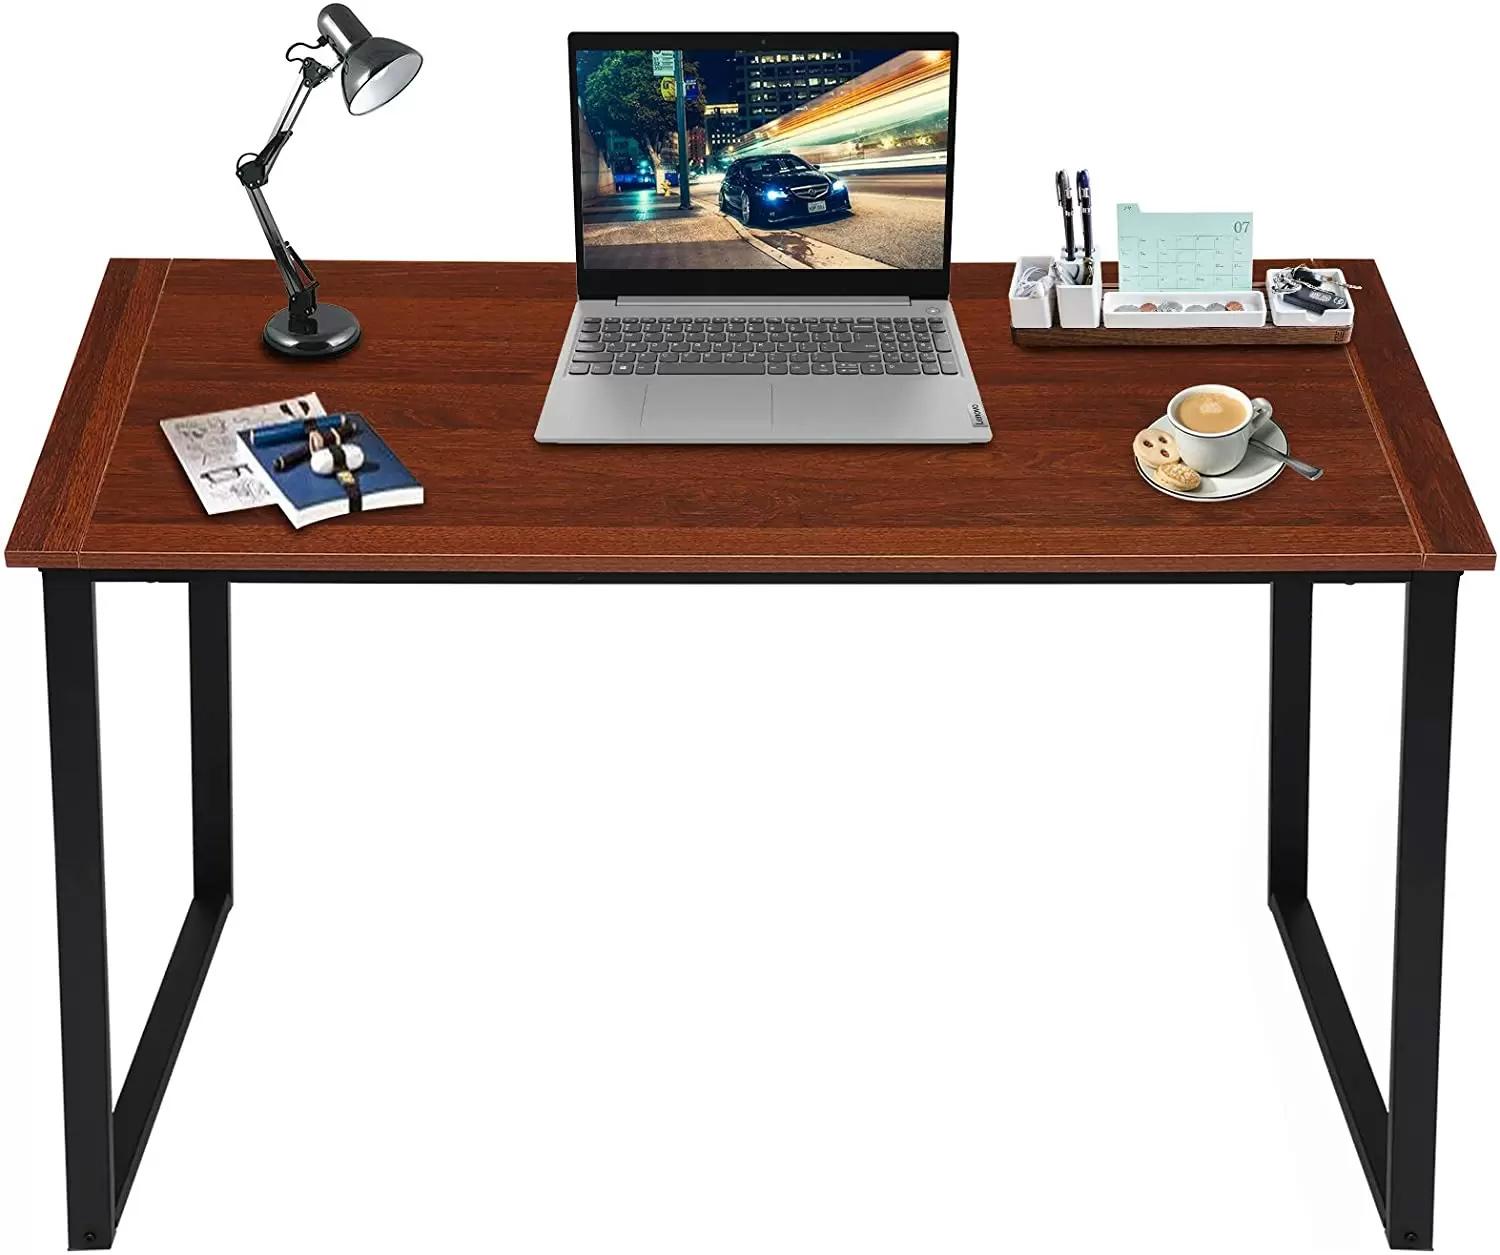 47in Kingso Computer Desk for $29.99 Shipped